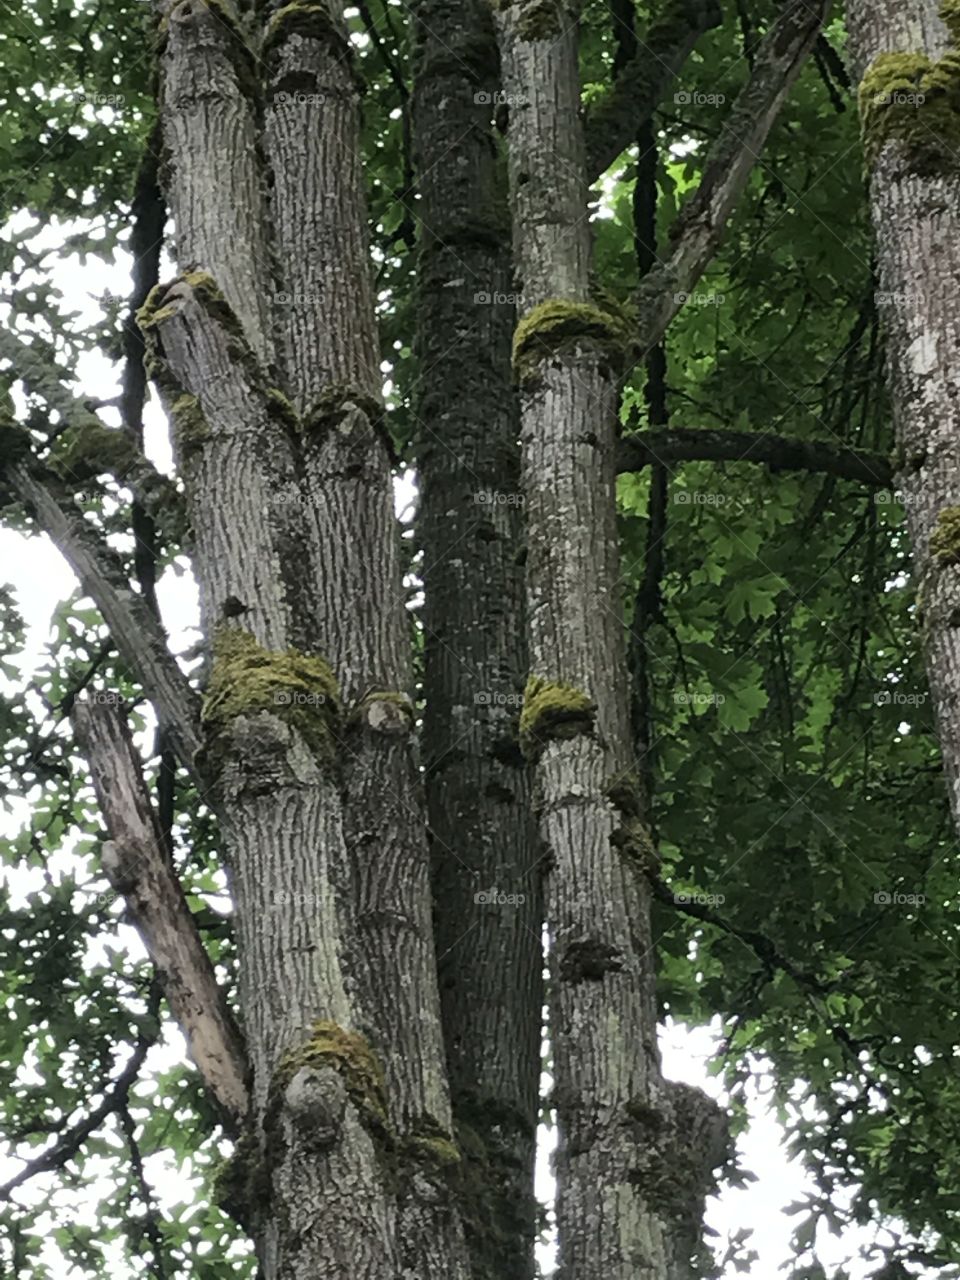 I love the bark pattern on these trees